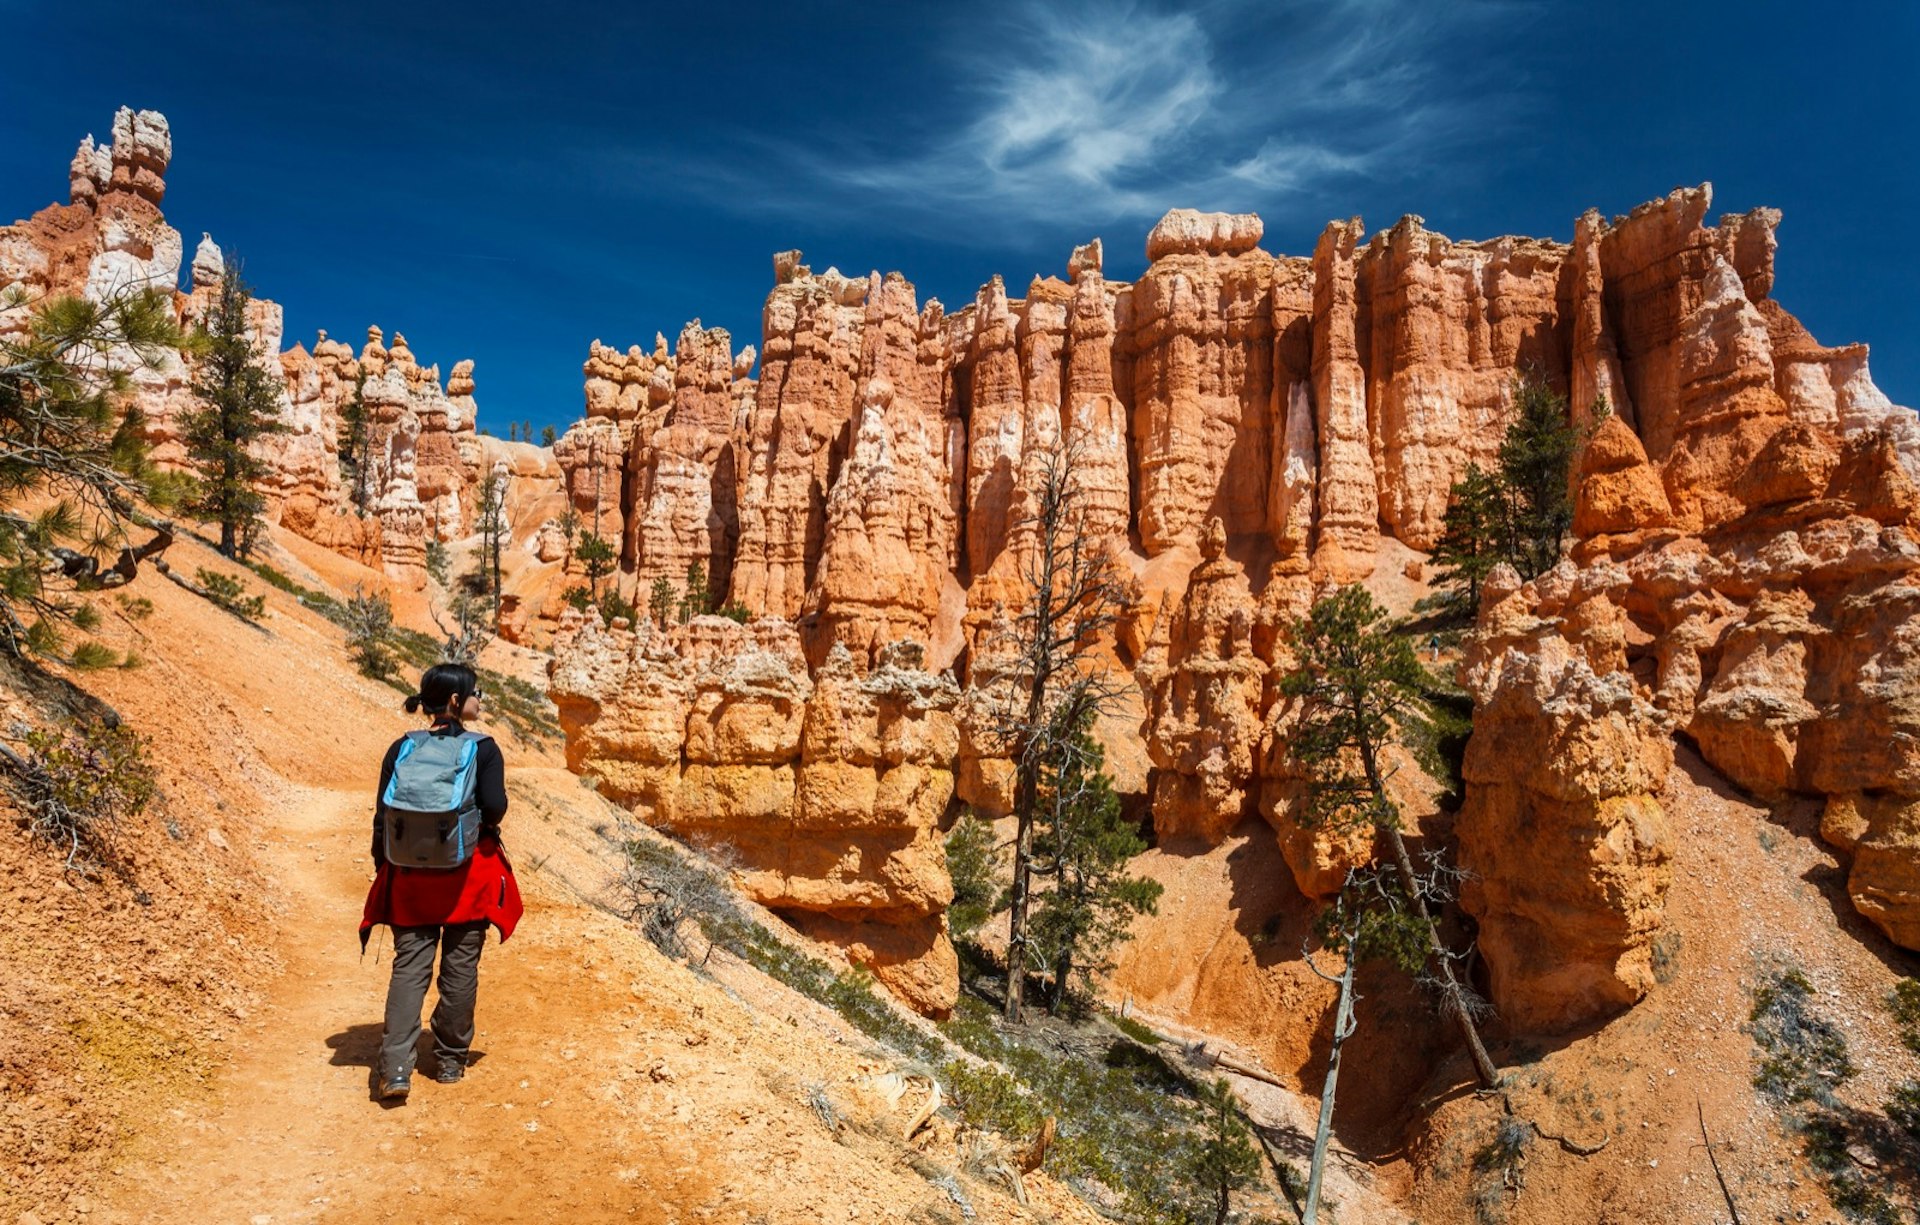 A person hikes the Queen's Garden Trail in Bryce Canyon National Park, Utah. Hoodoos stand out to the right